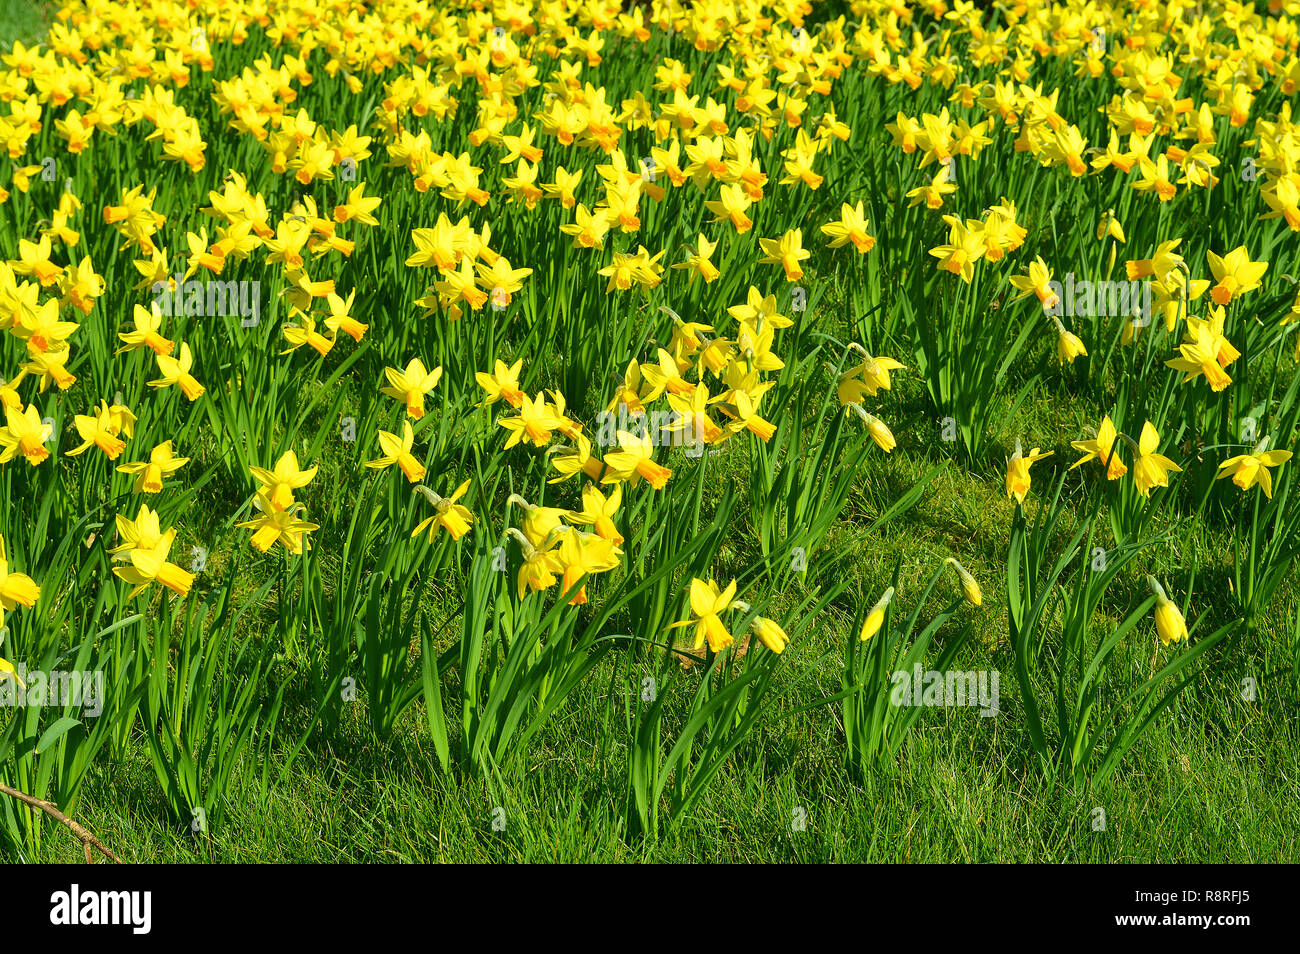 Daffodils Latin name Narcissus February Gold flowers Stock Photo